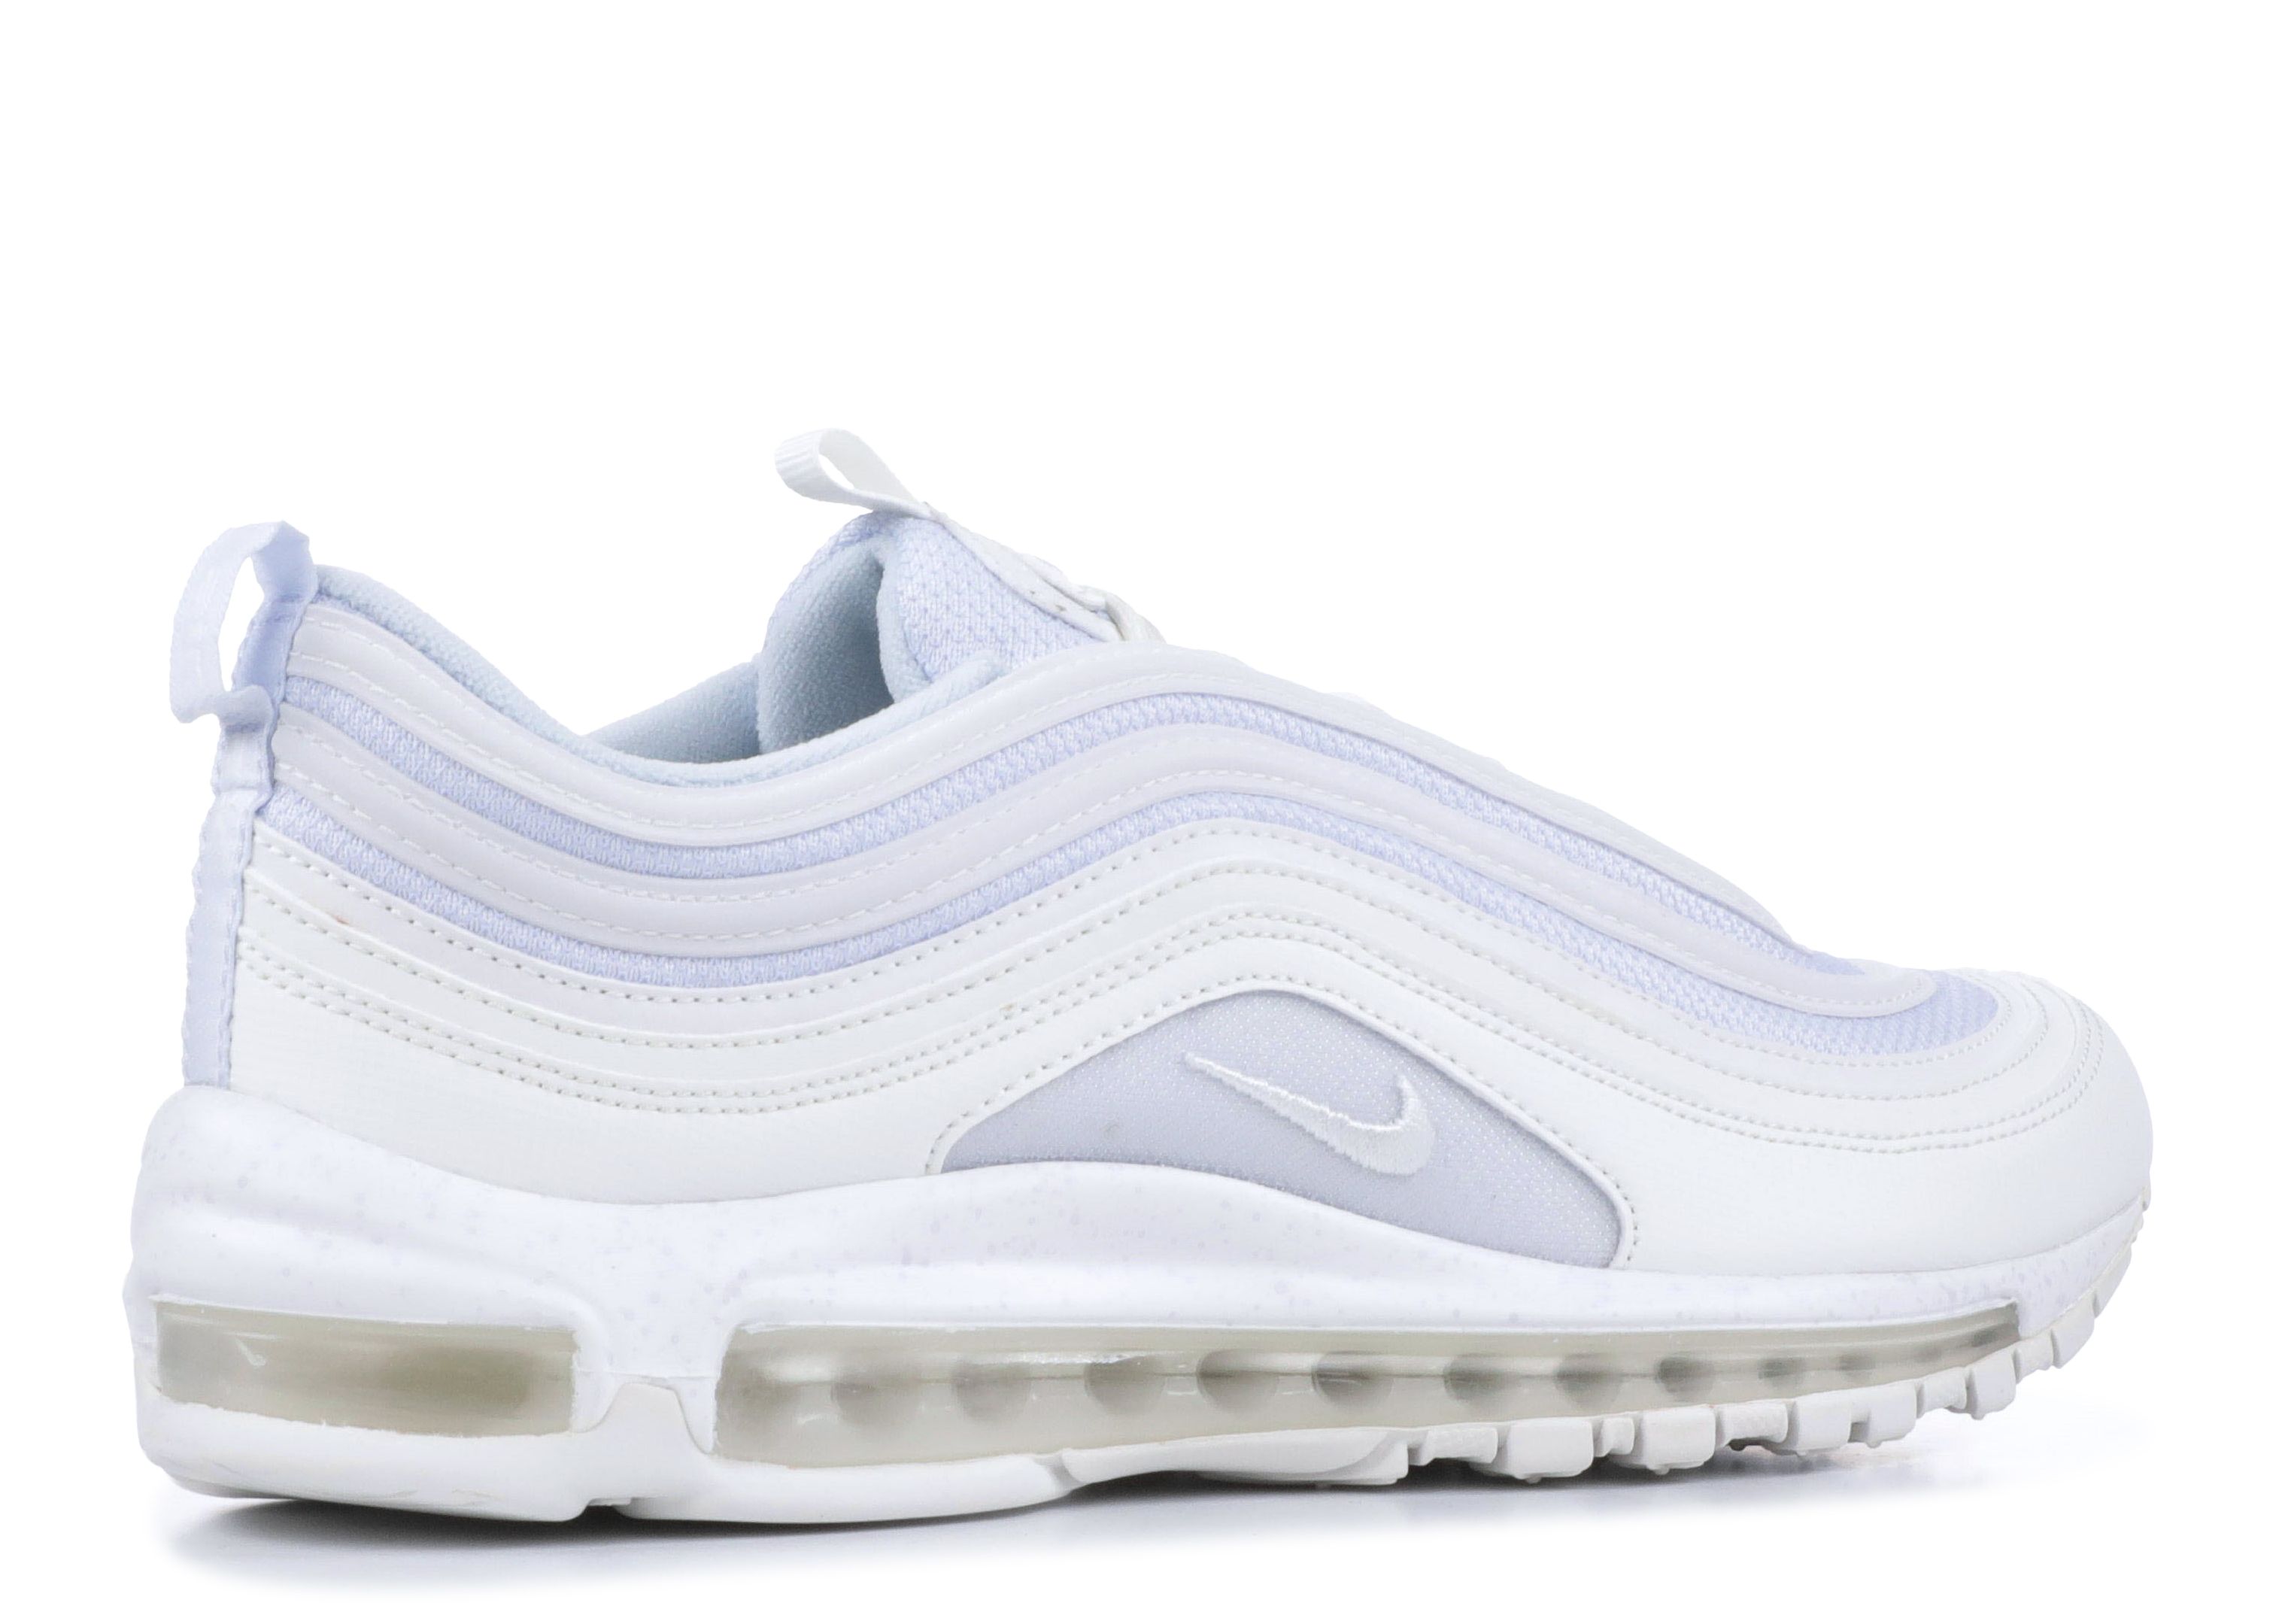 air max 97 light blue and pink